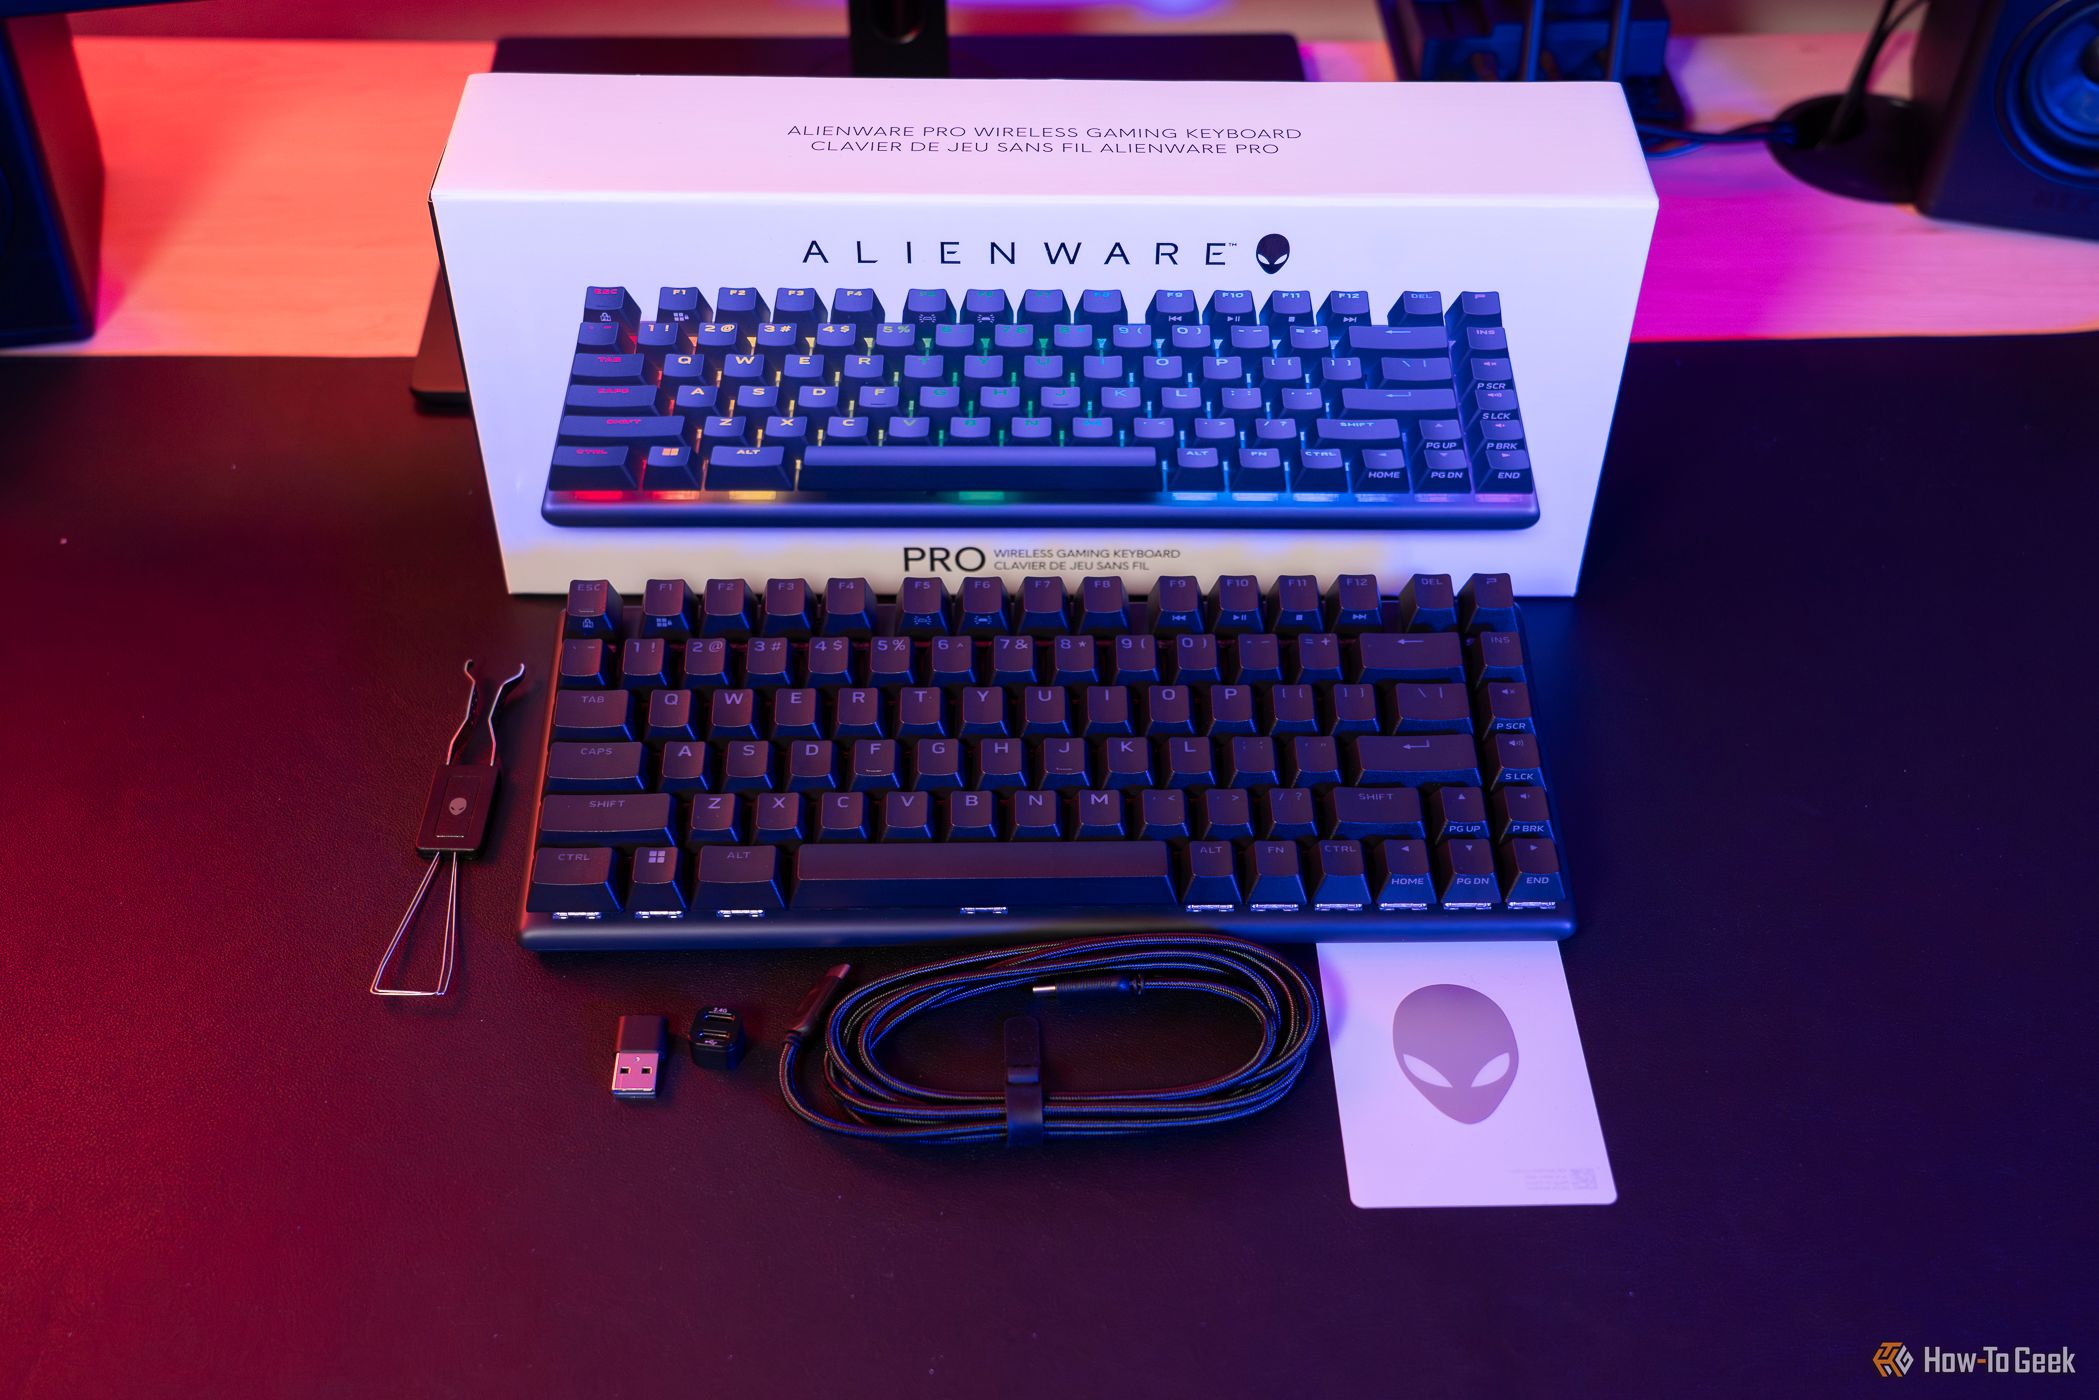 A black Alienware Pro Wireless Keyboard with box and accessories